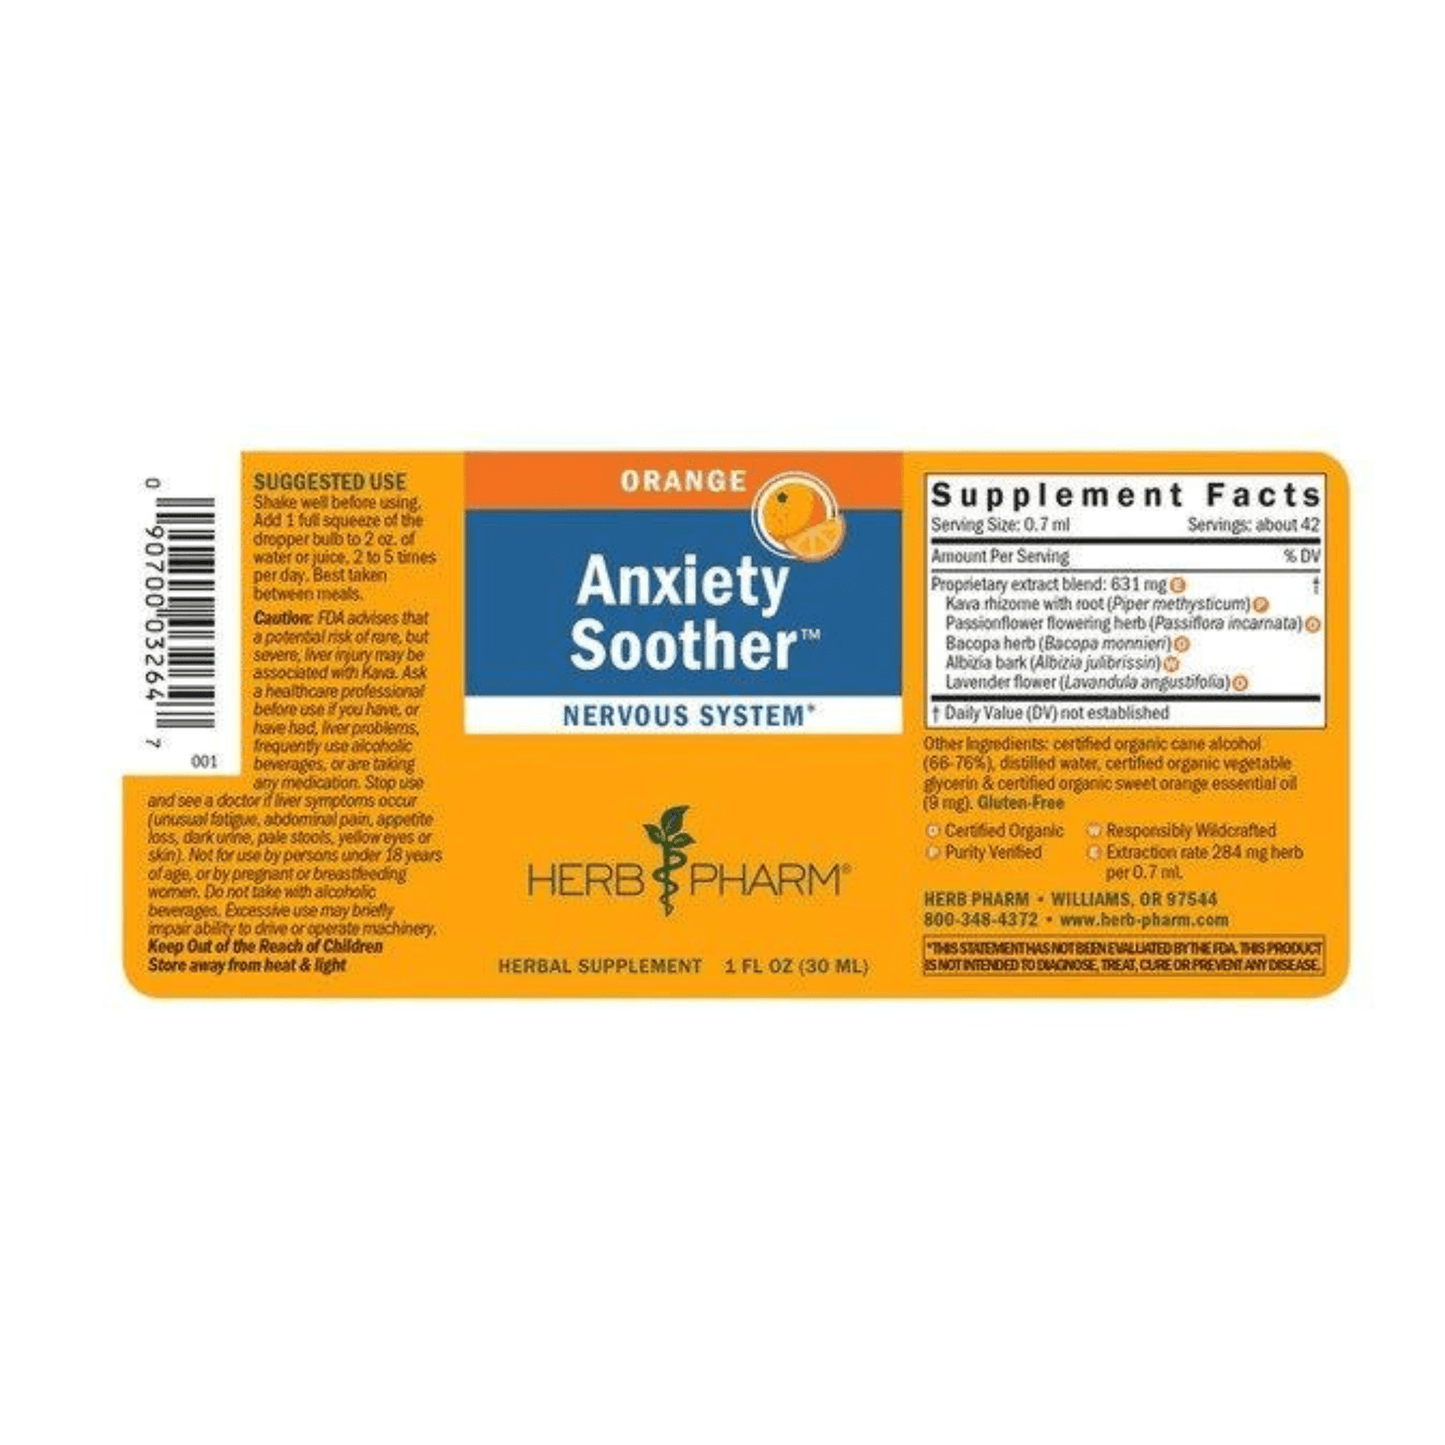 Alternate Image of Orange Anxiety Soother